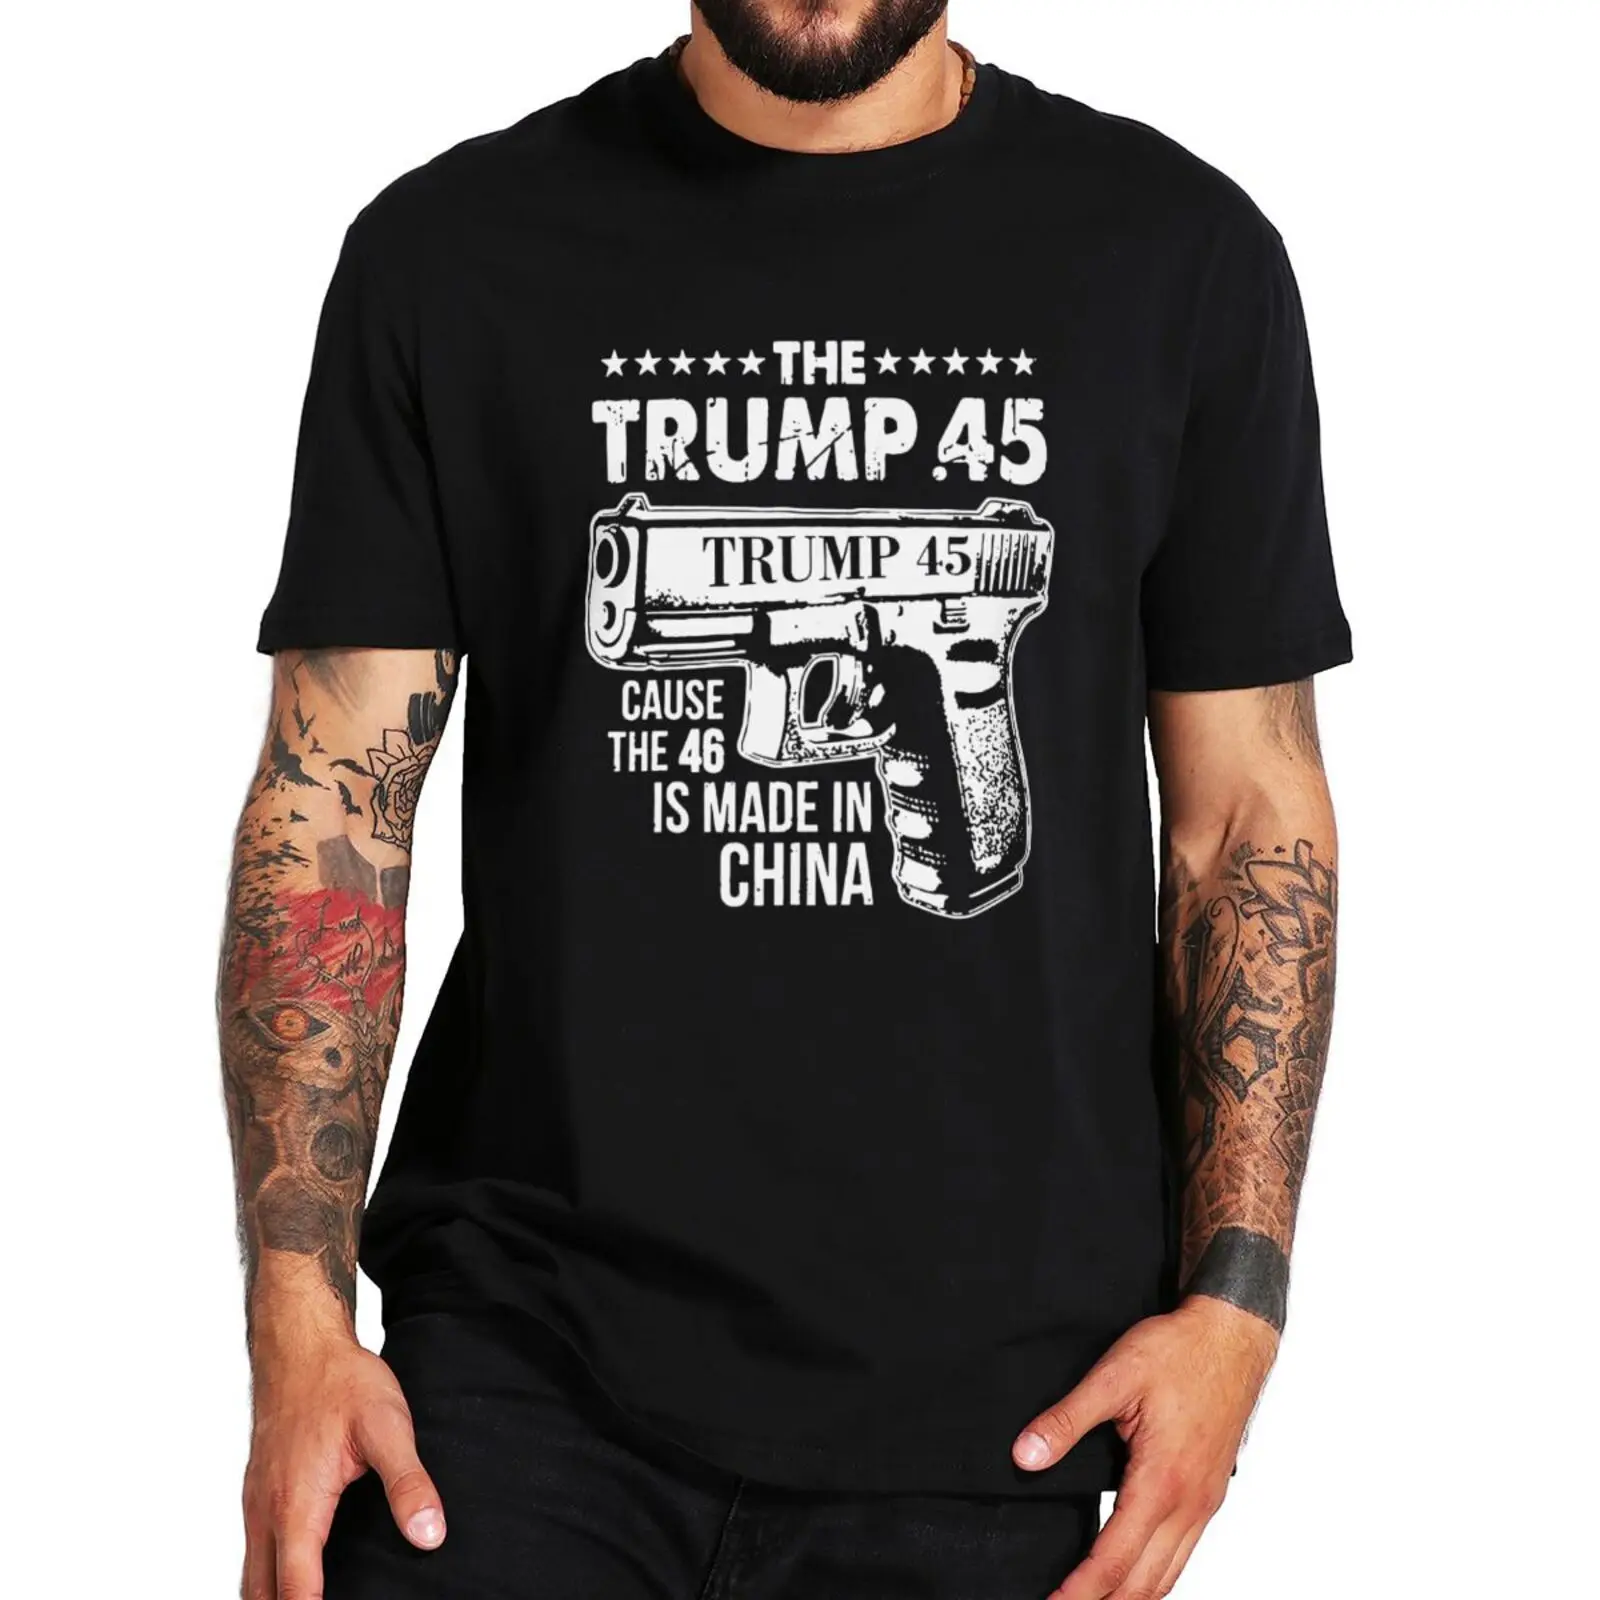 

The Trump 45 Cause The 46 Is Made In China T Shirt Funny Meme Political Jokes Retro Tops Causal 100% Cotton Unisex T-shirt